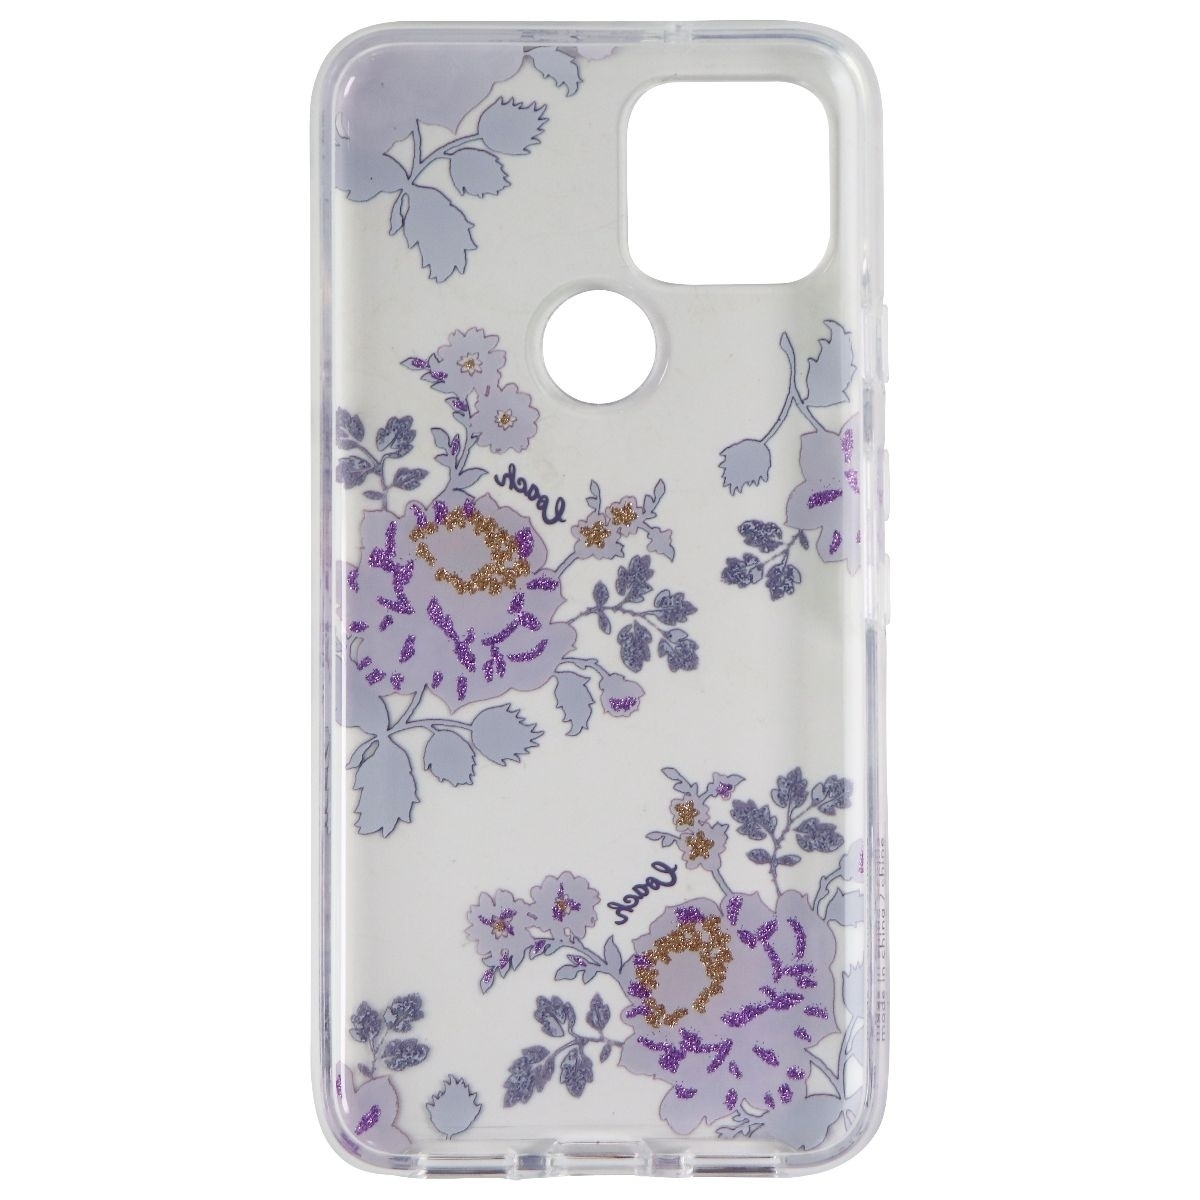 Coach Protective Hard Case For Google Pixel 5 - Moody Floral Clear